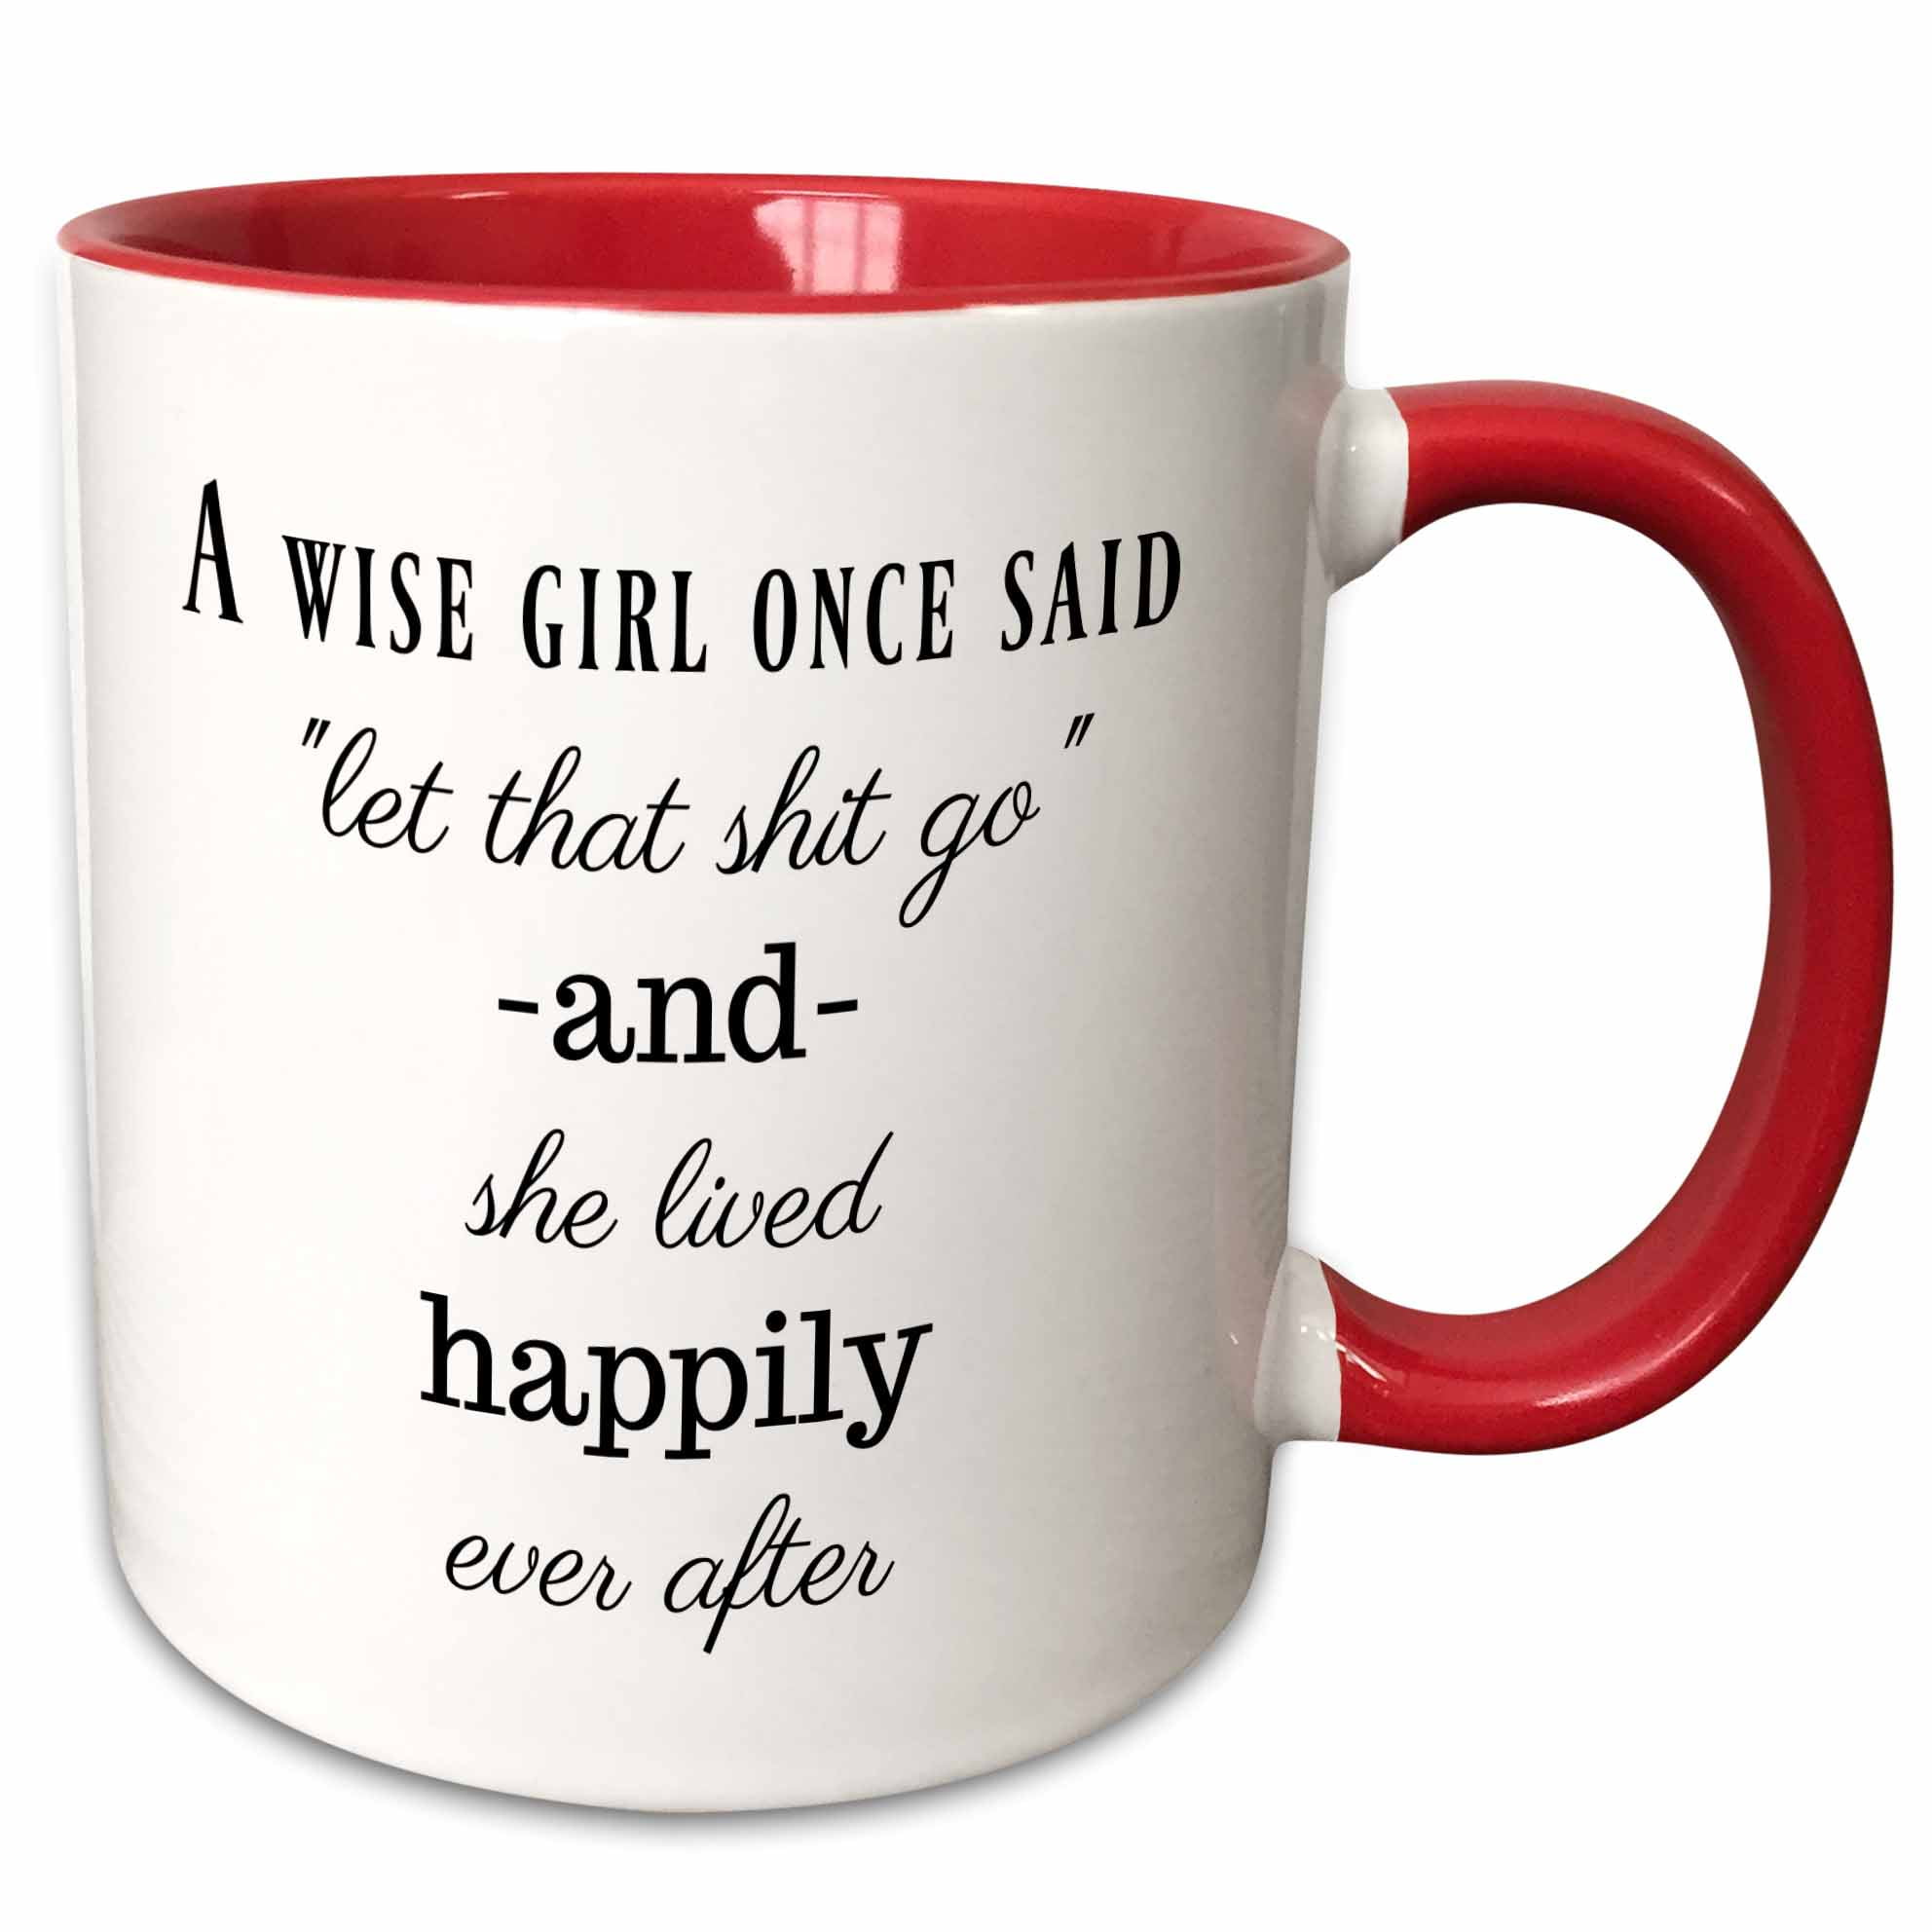 She's with me for my cooking mug - chef gifts chef gifts for men chef funny  (11oz) Black